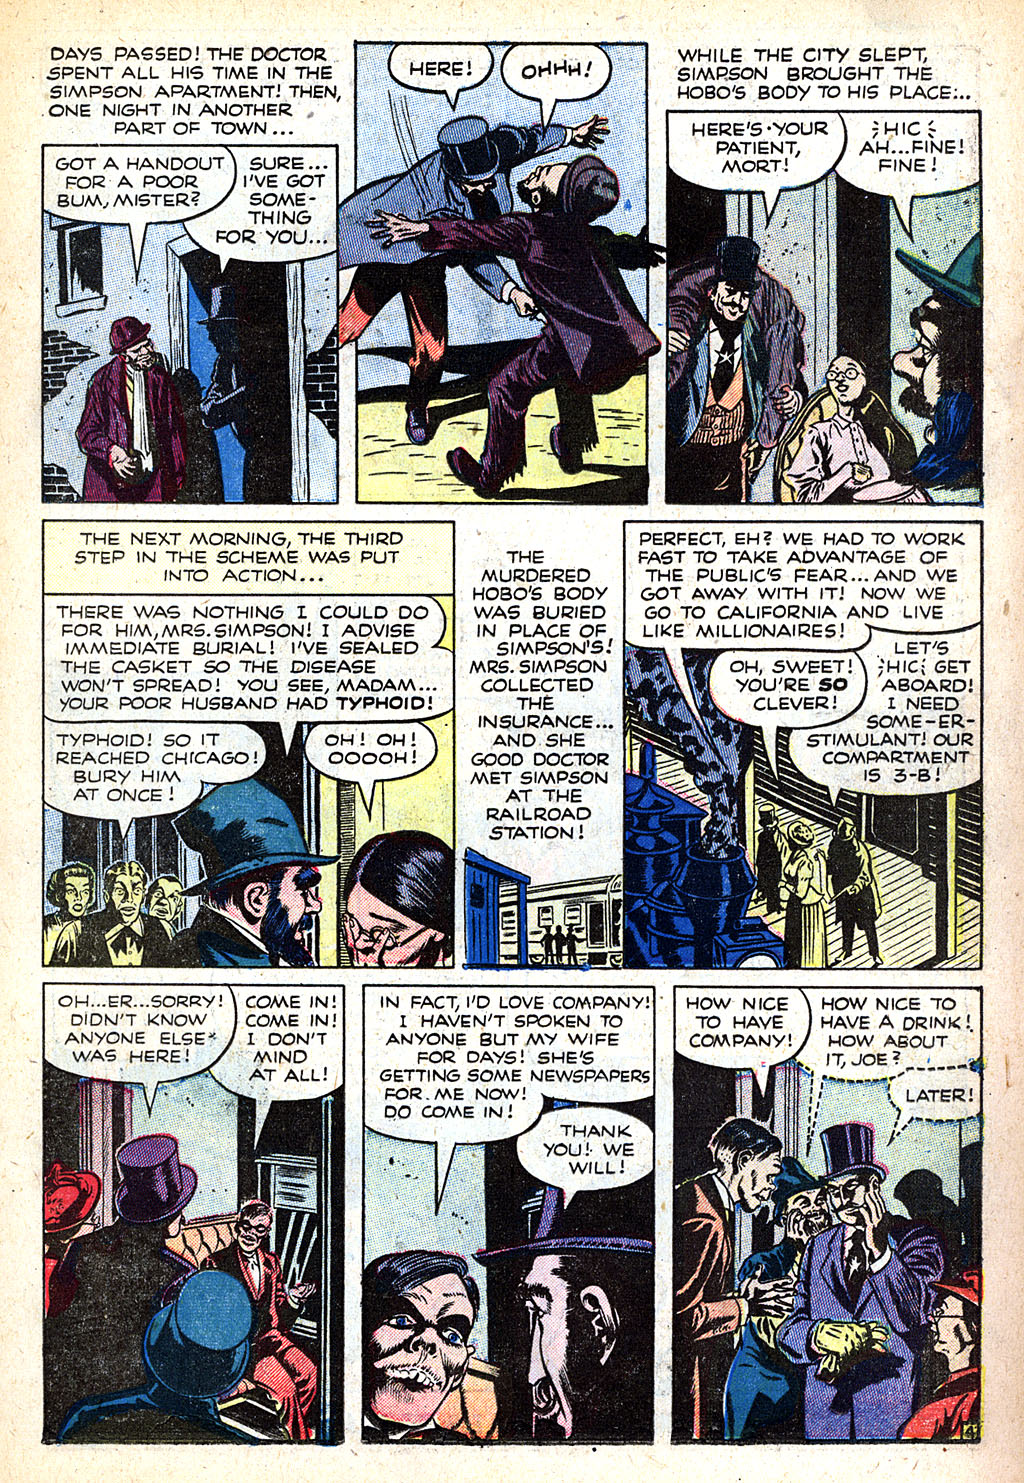 Marvel Tales (1949) 118 Page 12